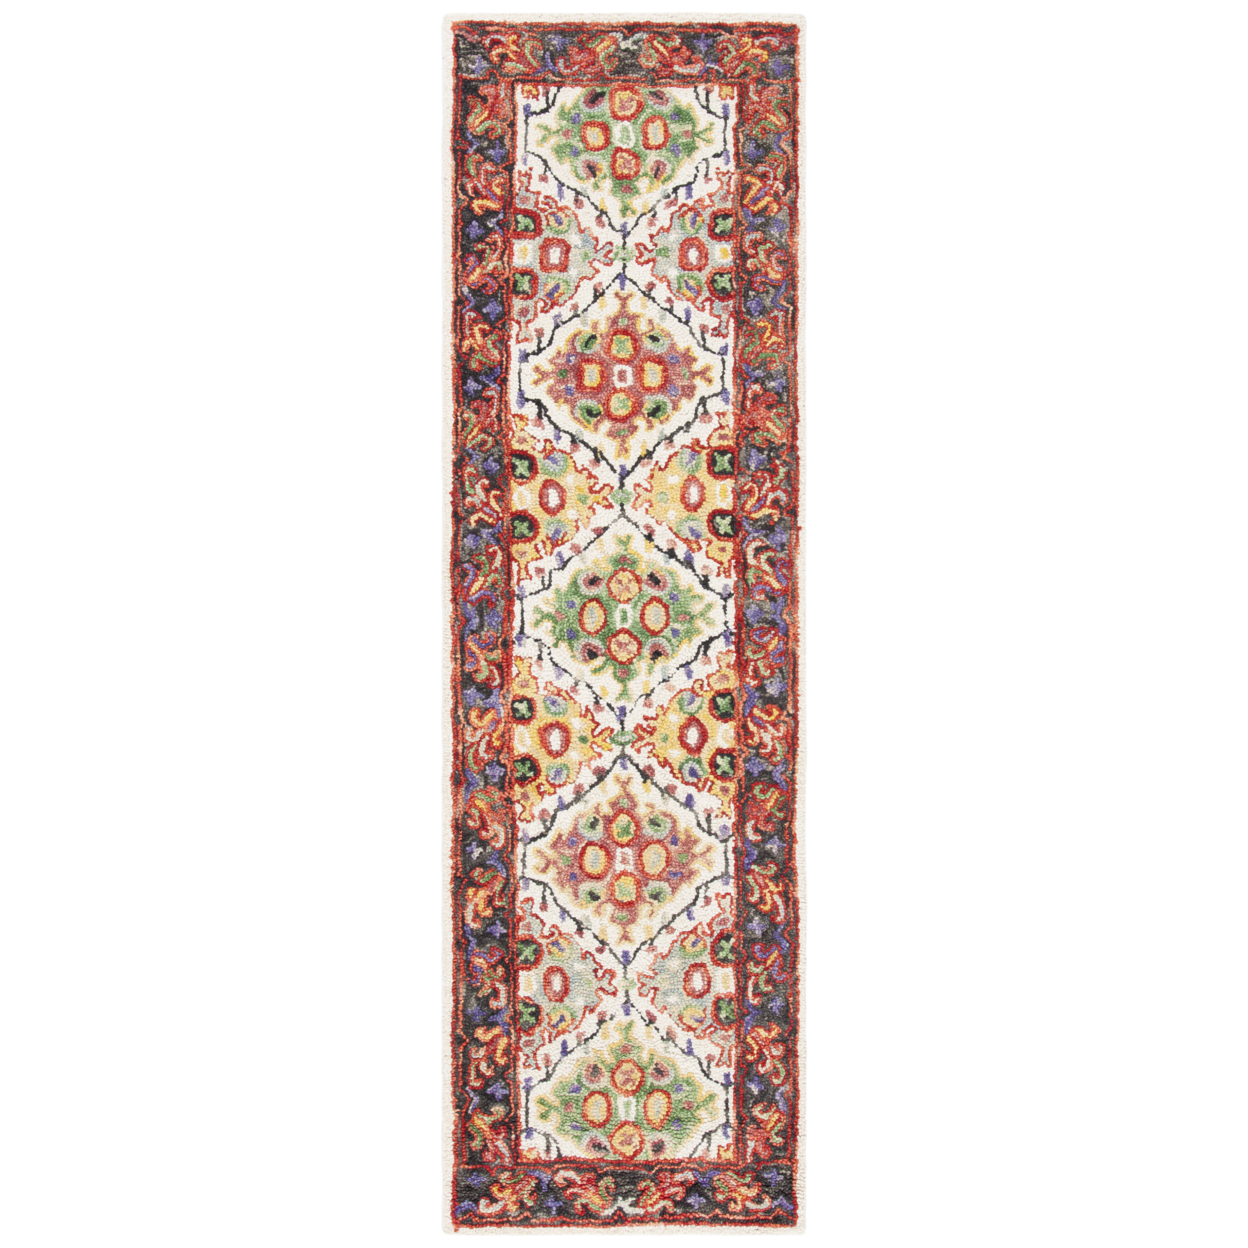 SAFAVIEH Trace Collection TRC524A Handmade Ivory/Red Rug - 2' 3 X 8'